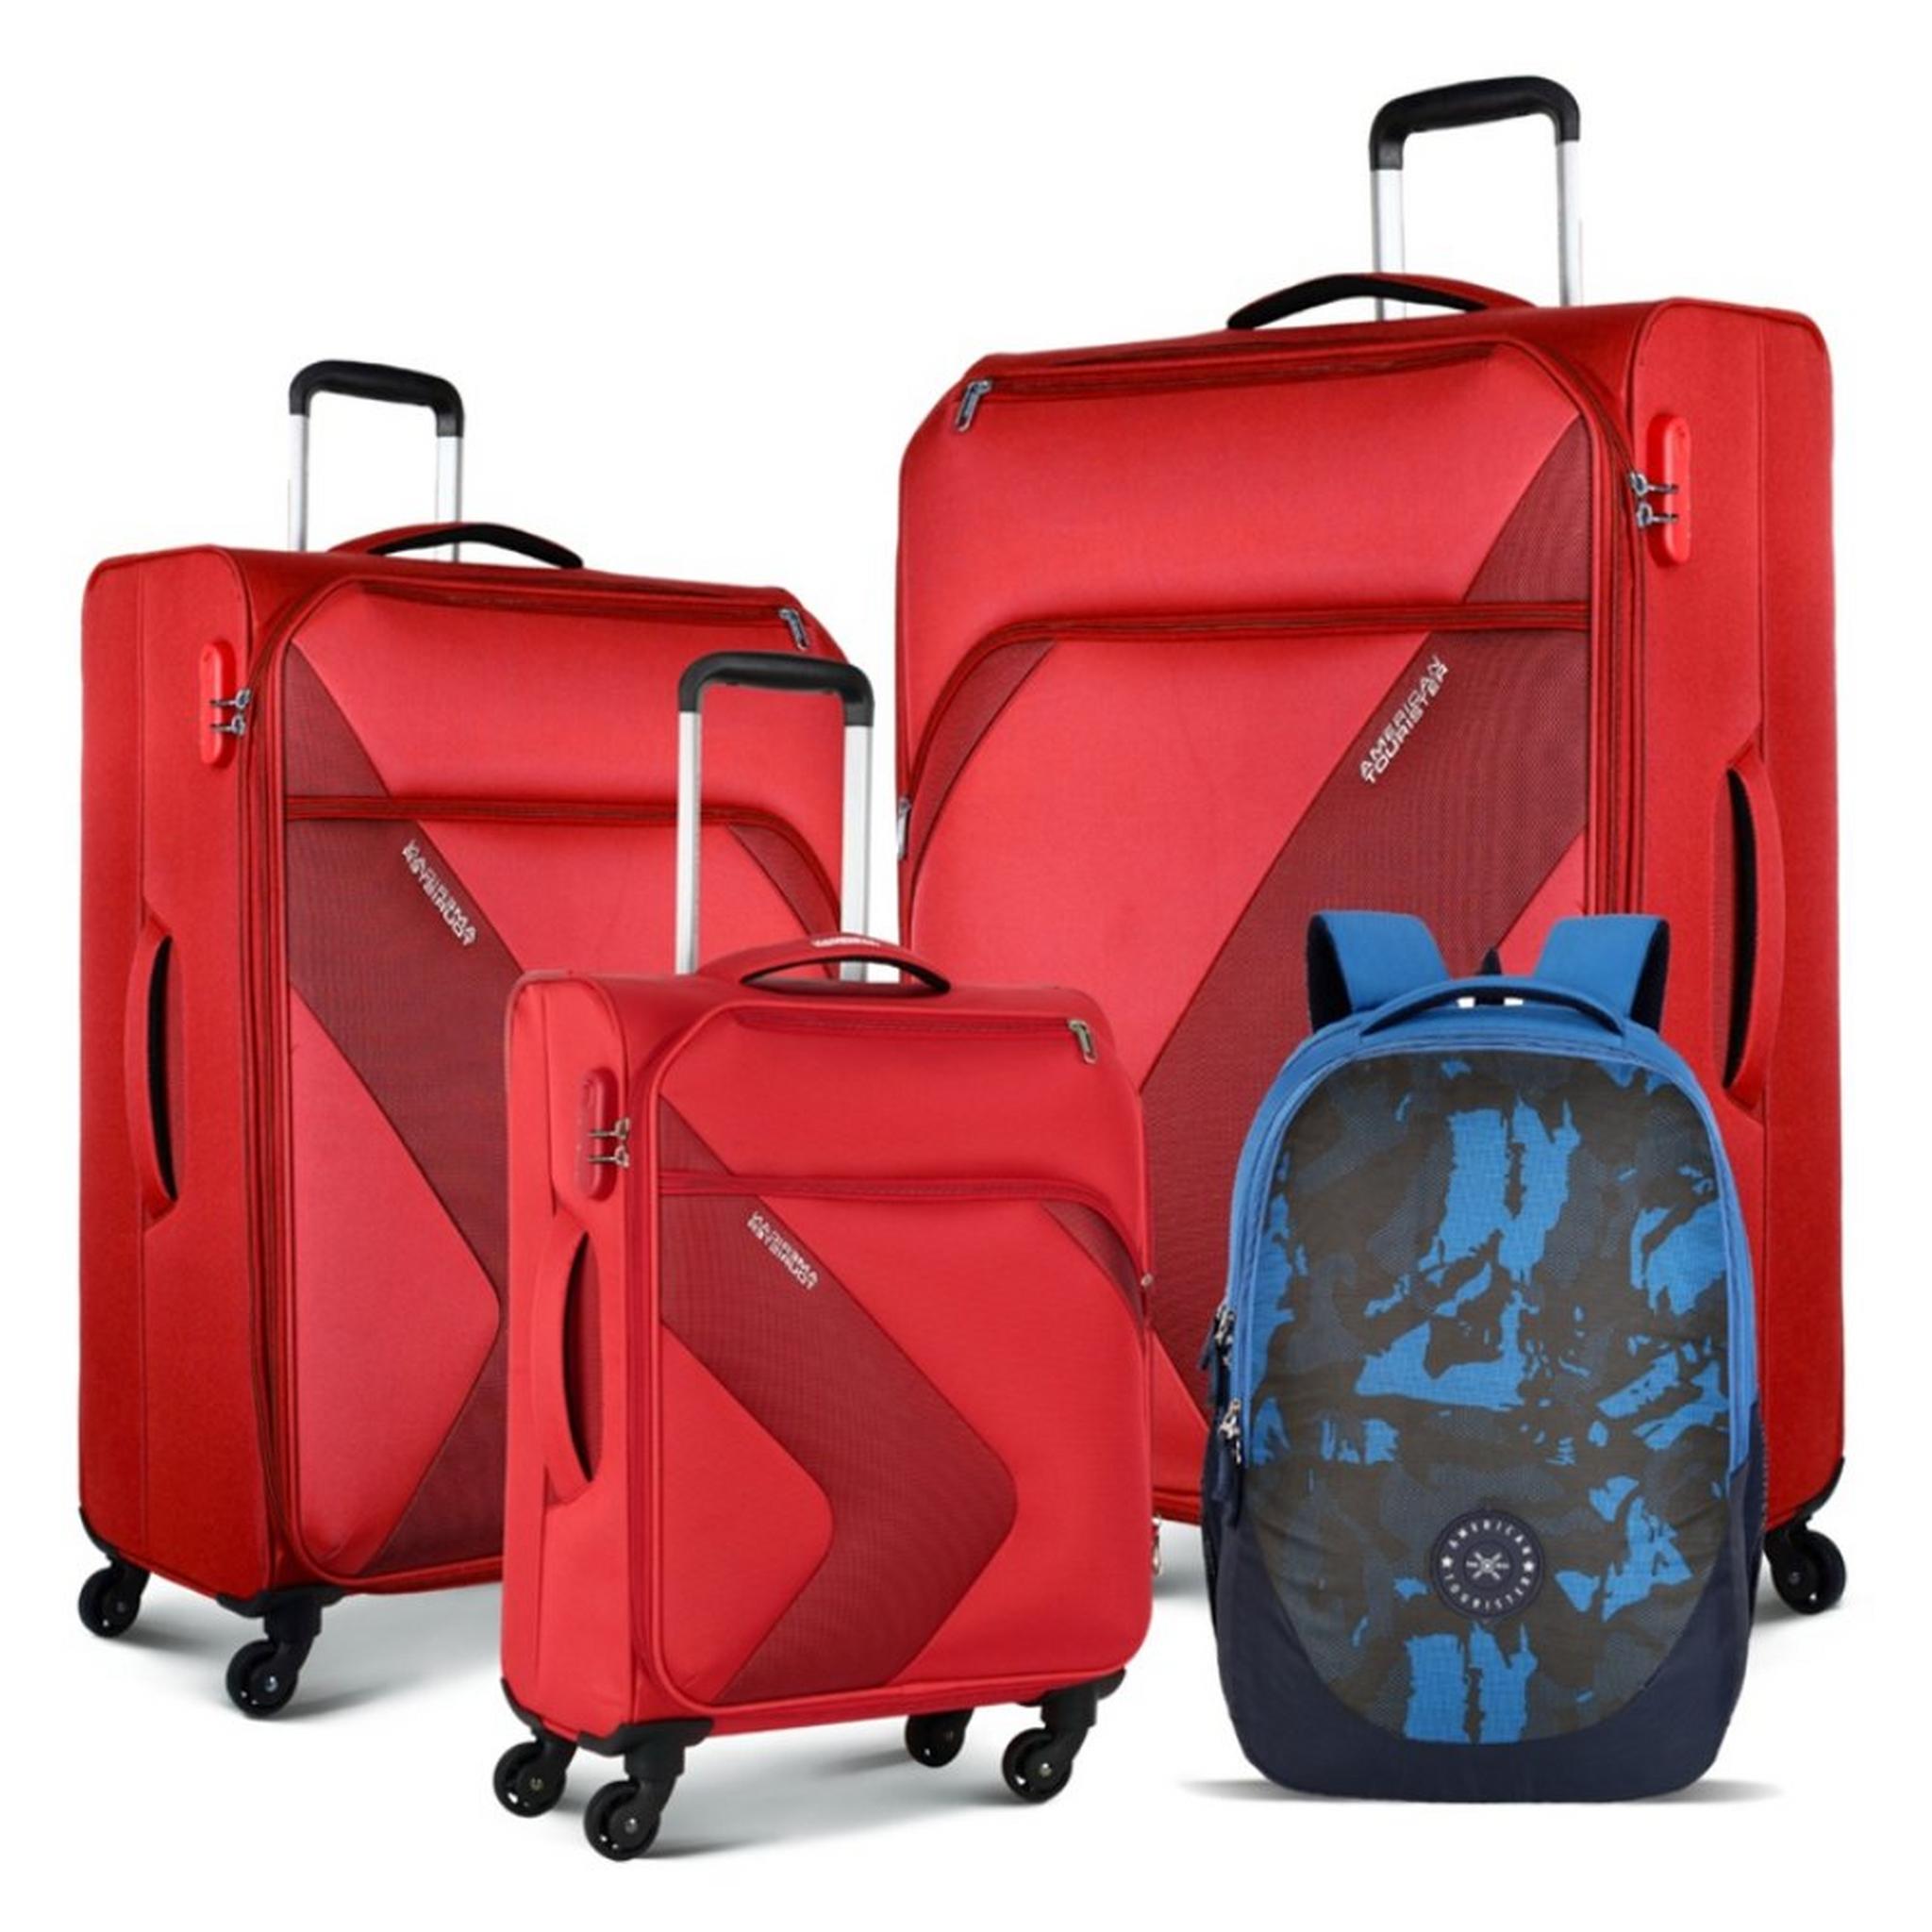 American Tourister Stanfordd Luggage Set + Backpack - Red